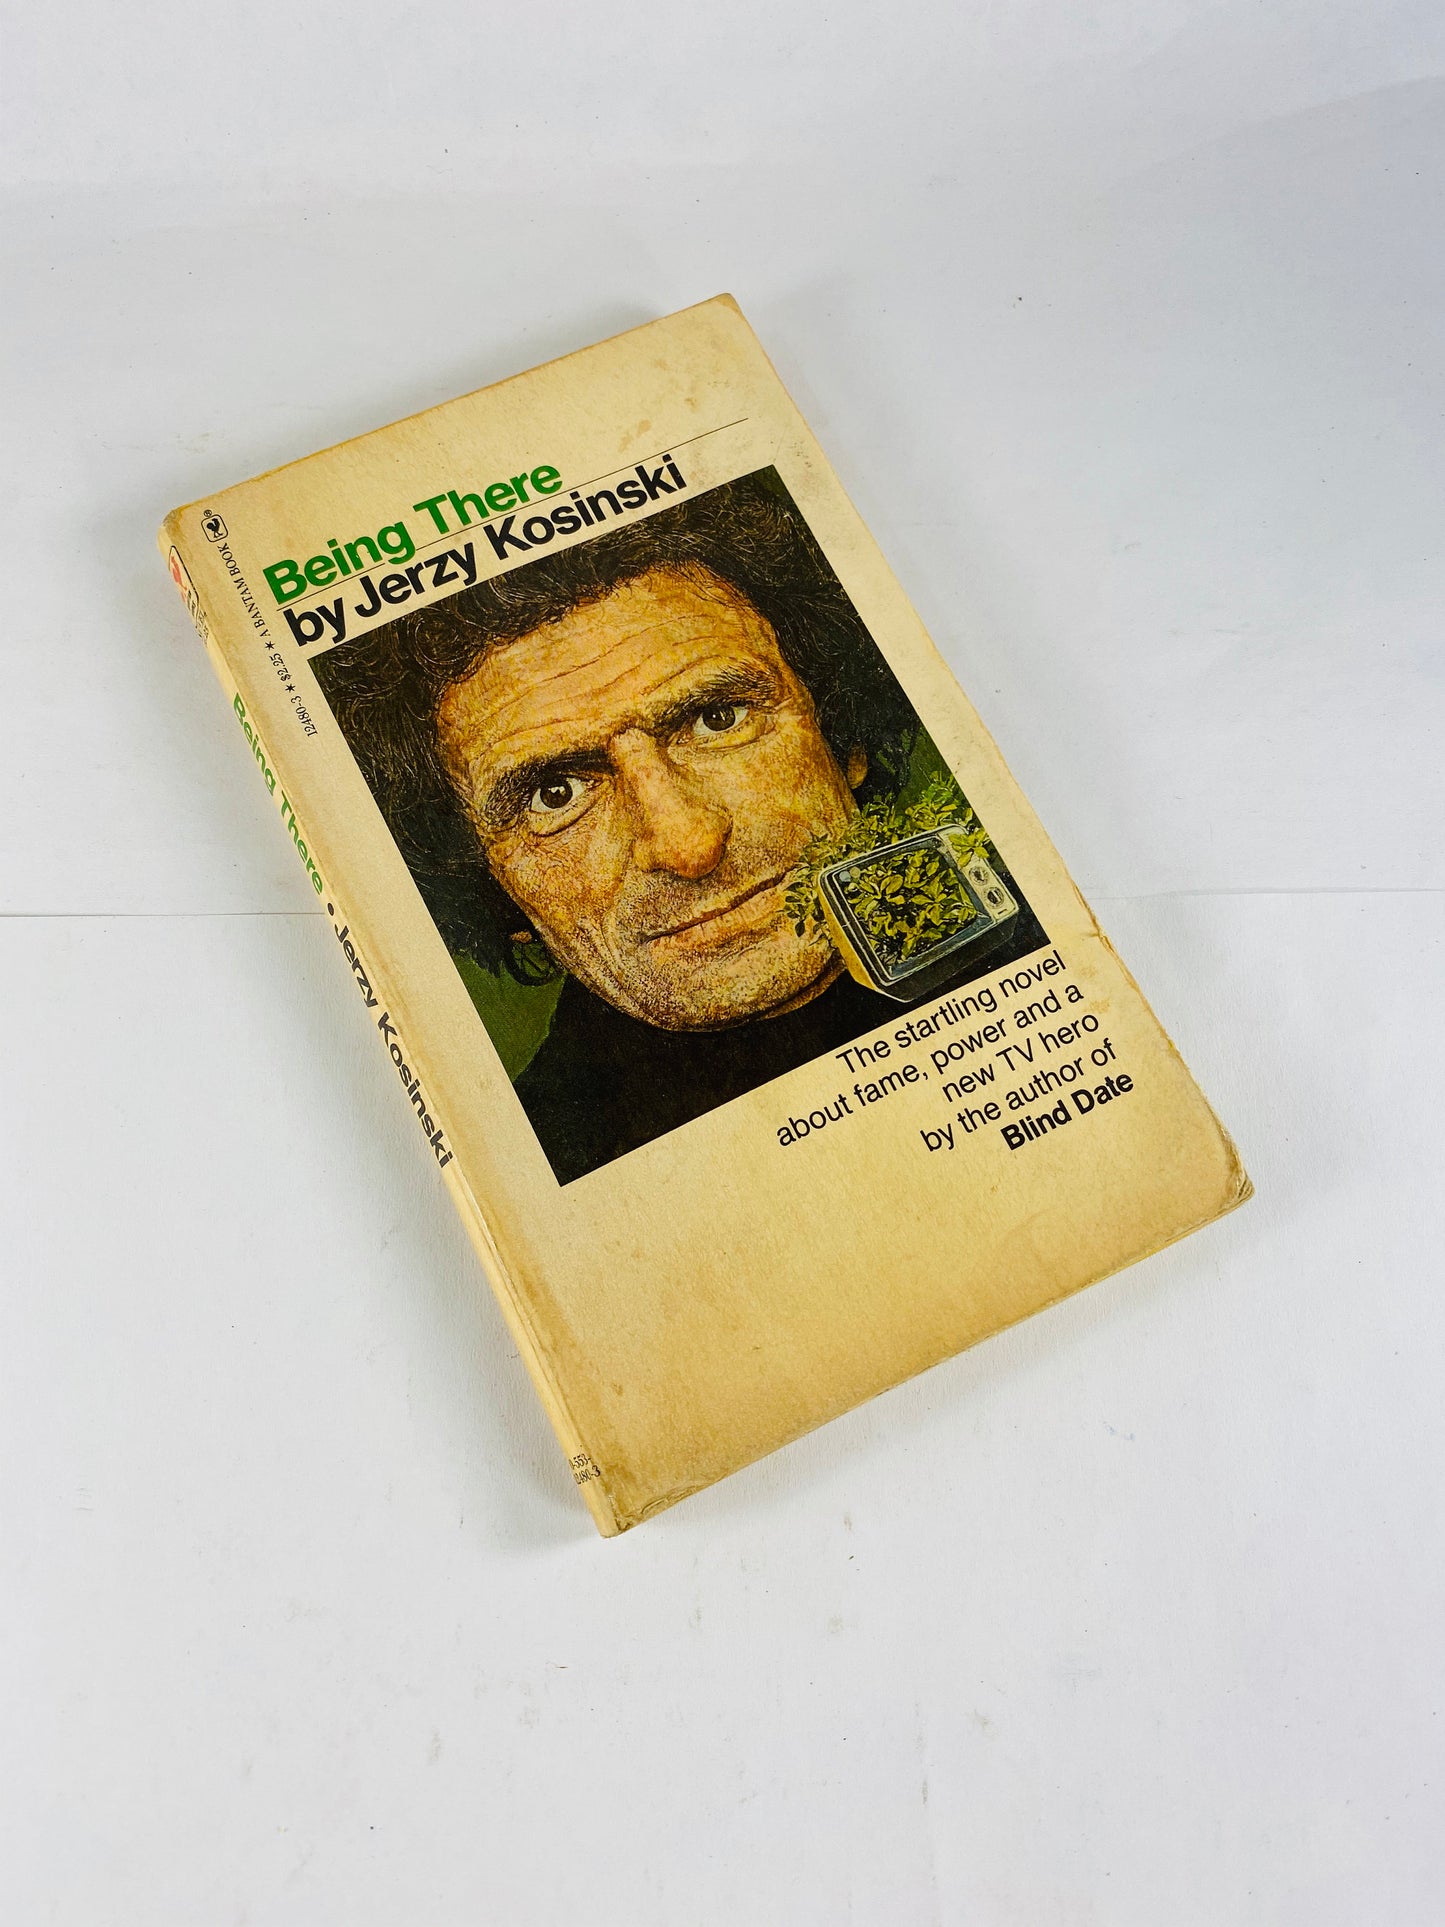 1978 Being There by Jerzy Kosinski Vintage paperback book Sexual novel about terror killing, fear and politics